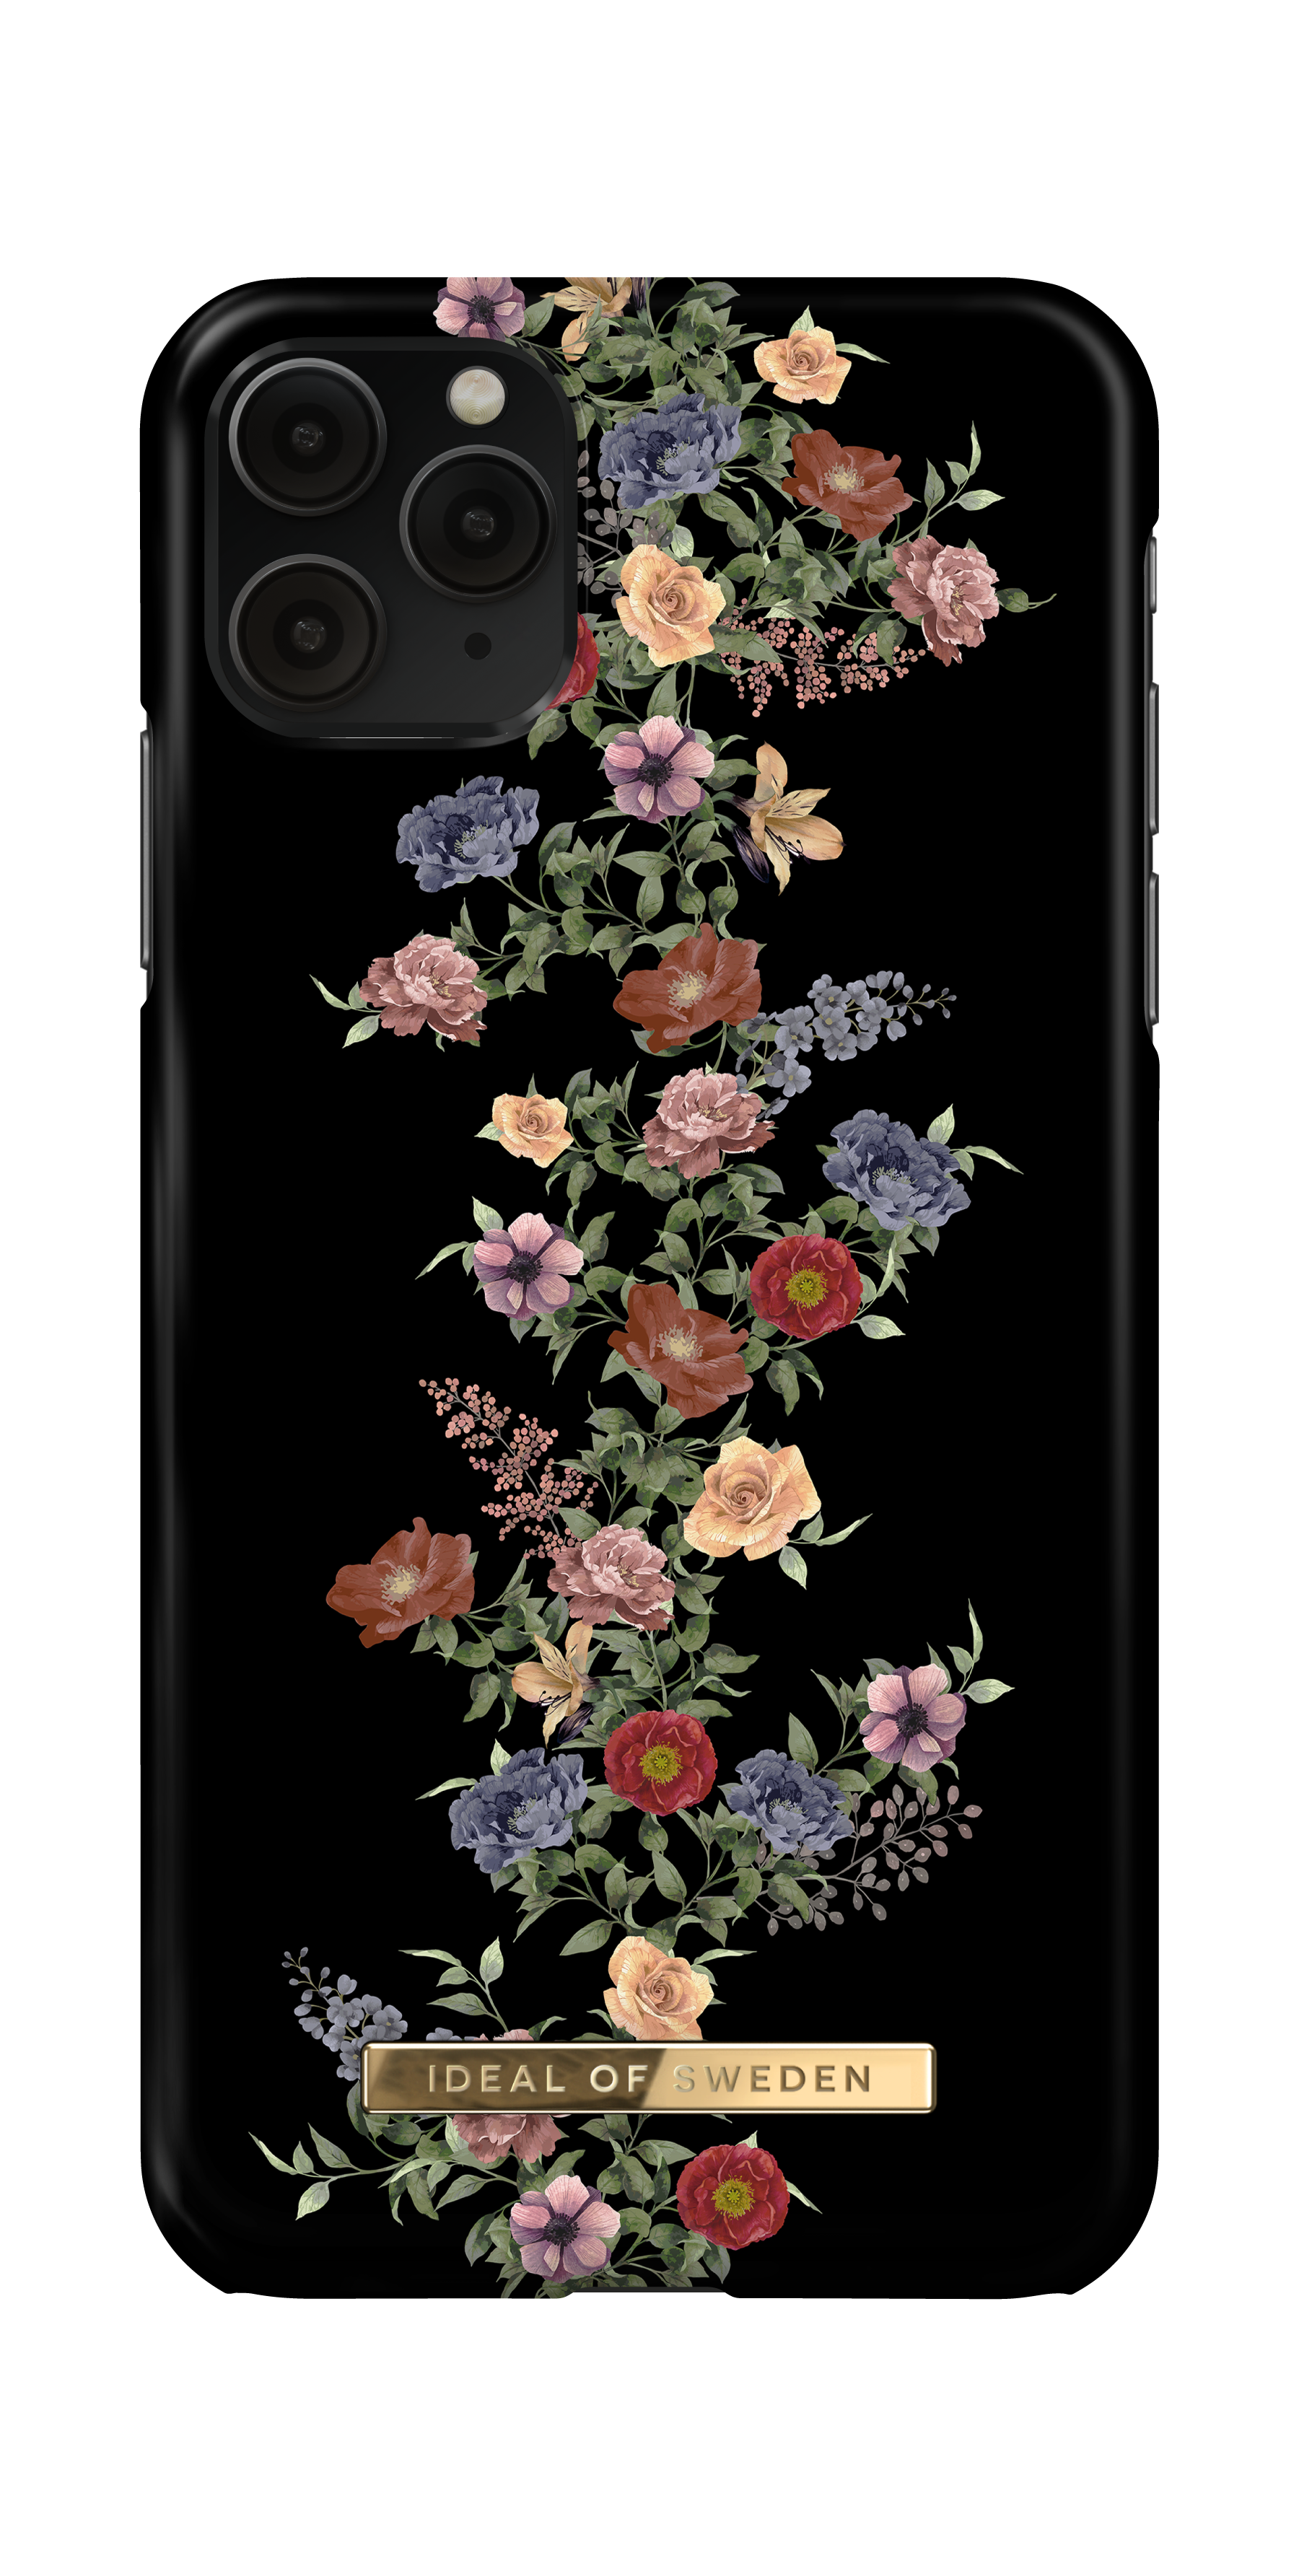 OF Max, iPhone Apple, XS Floral IDEAL Dark SWEDEN Backcover, Pro 11 iPhone Max, IDFCAW18-I1965-97,